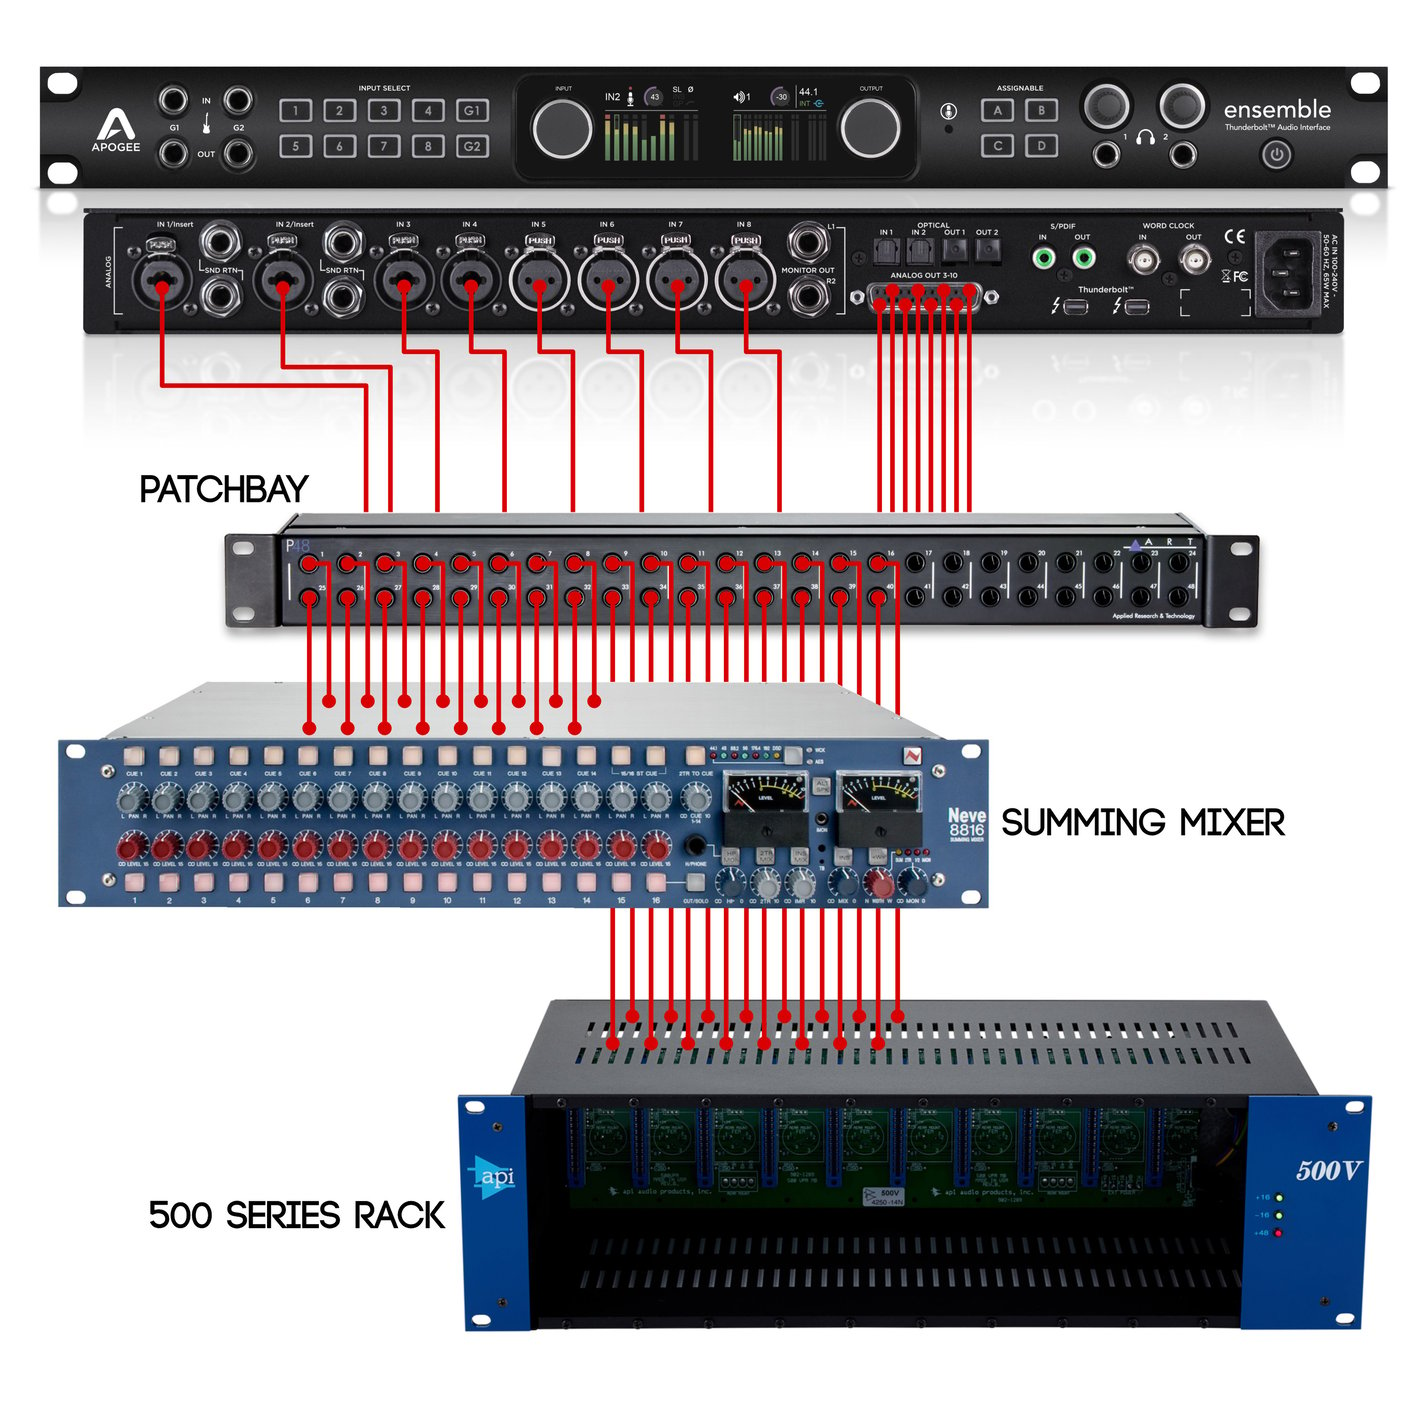 Get More From Your Apogee Interface - Expand It With 500ADAT